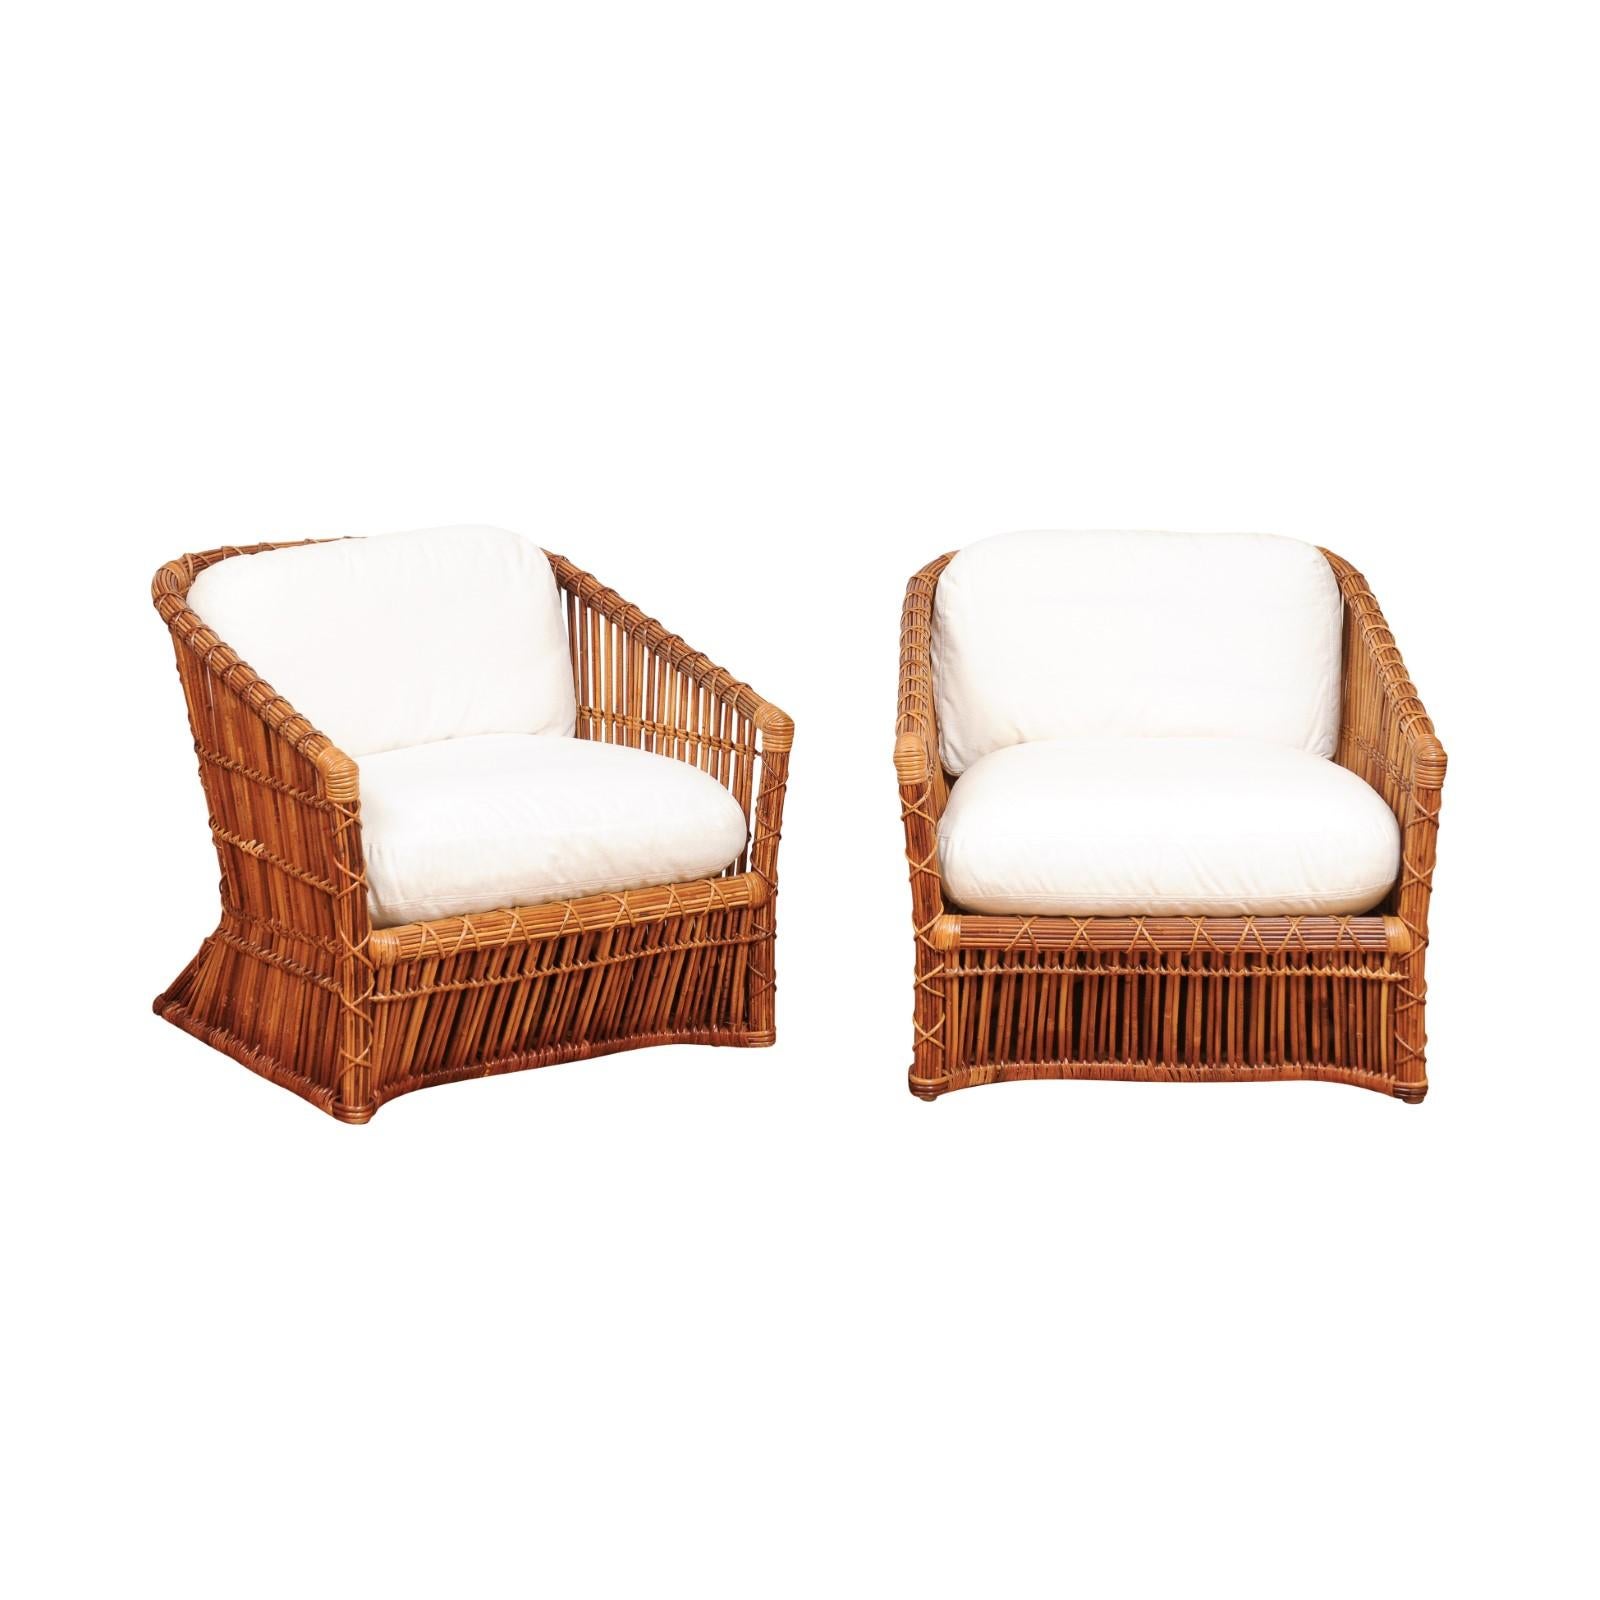 Exceptional Pair of Rattan and Cane Basket Loungers by McGuire, Circa 1975 For Sale 12